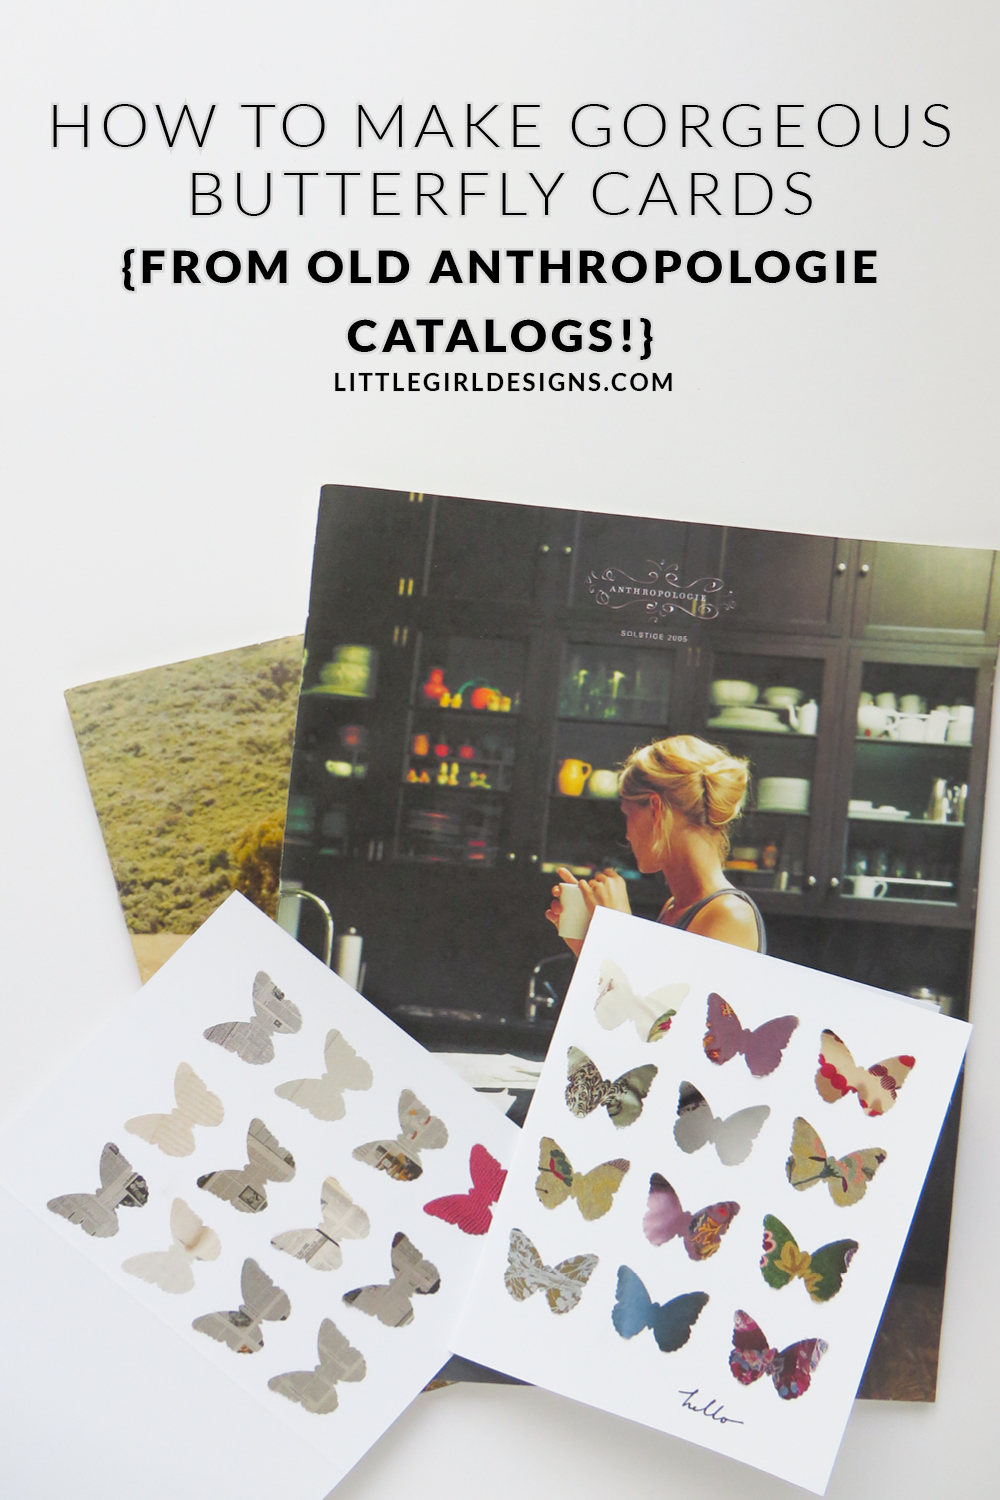 LOVE this card tutorial--it's super easy and now I don't feel so bad about my stacks of Anthropologie catalogs that I can't seem to throw away. This is the kind of tutorial that anyone could do (it's even kid-friendly in my opinion!)